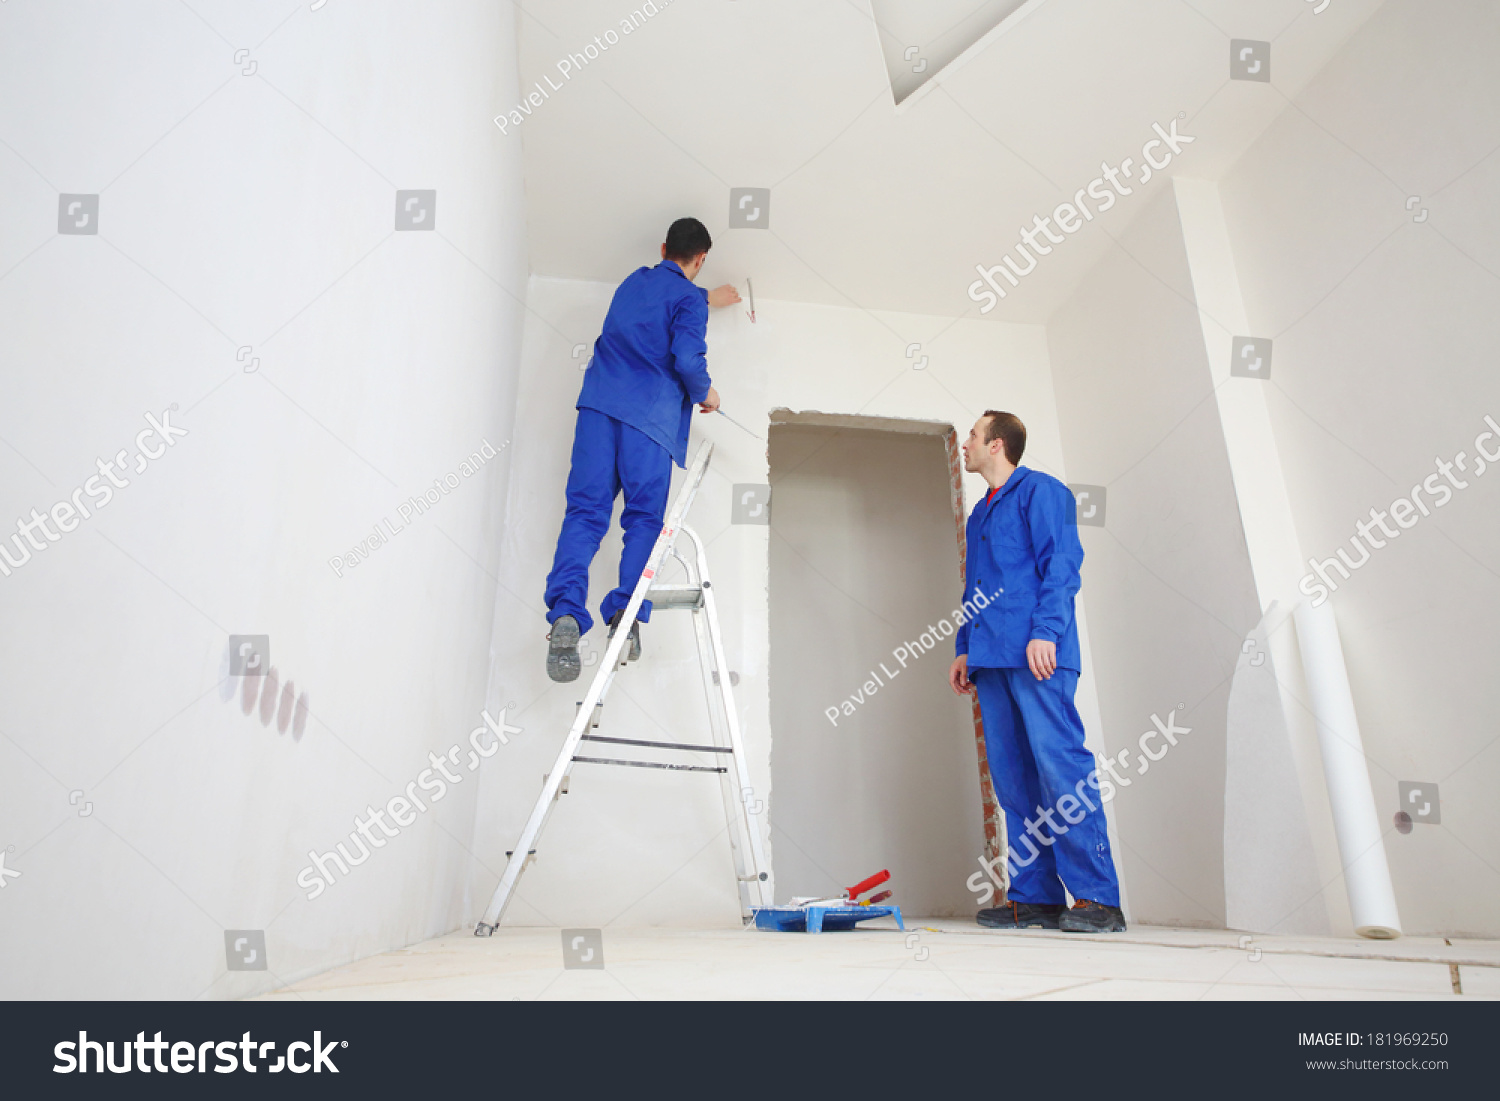 Young Workers Blue Clothes Glue Paint Stock Photo Safe To Use